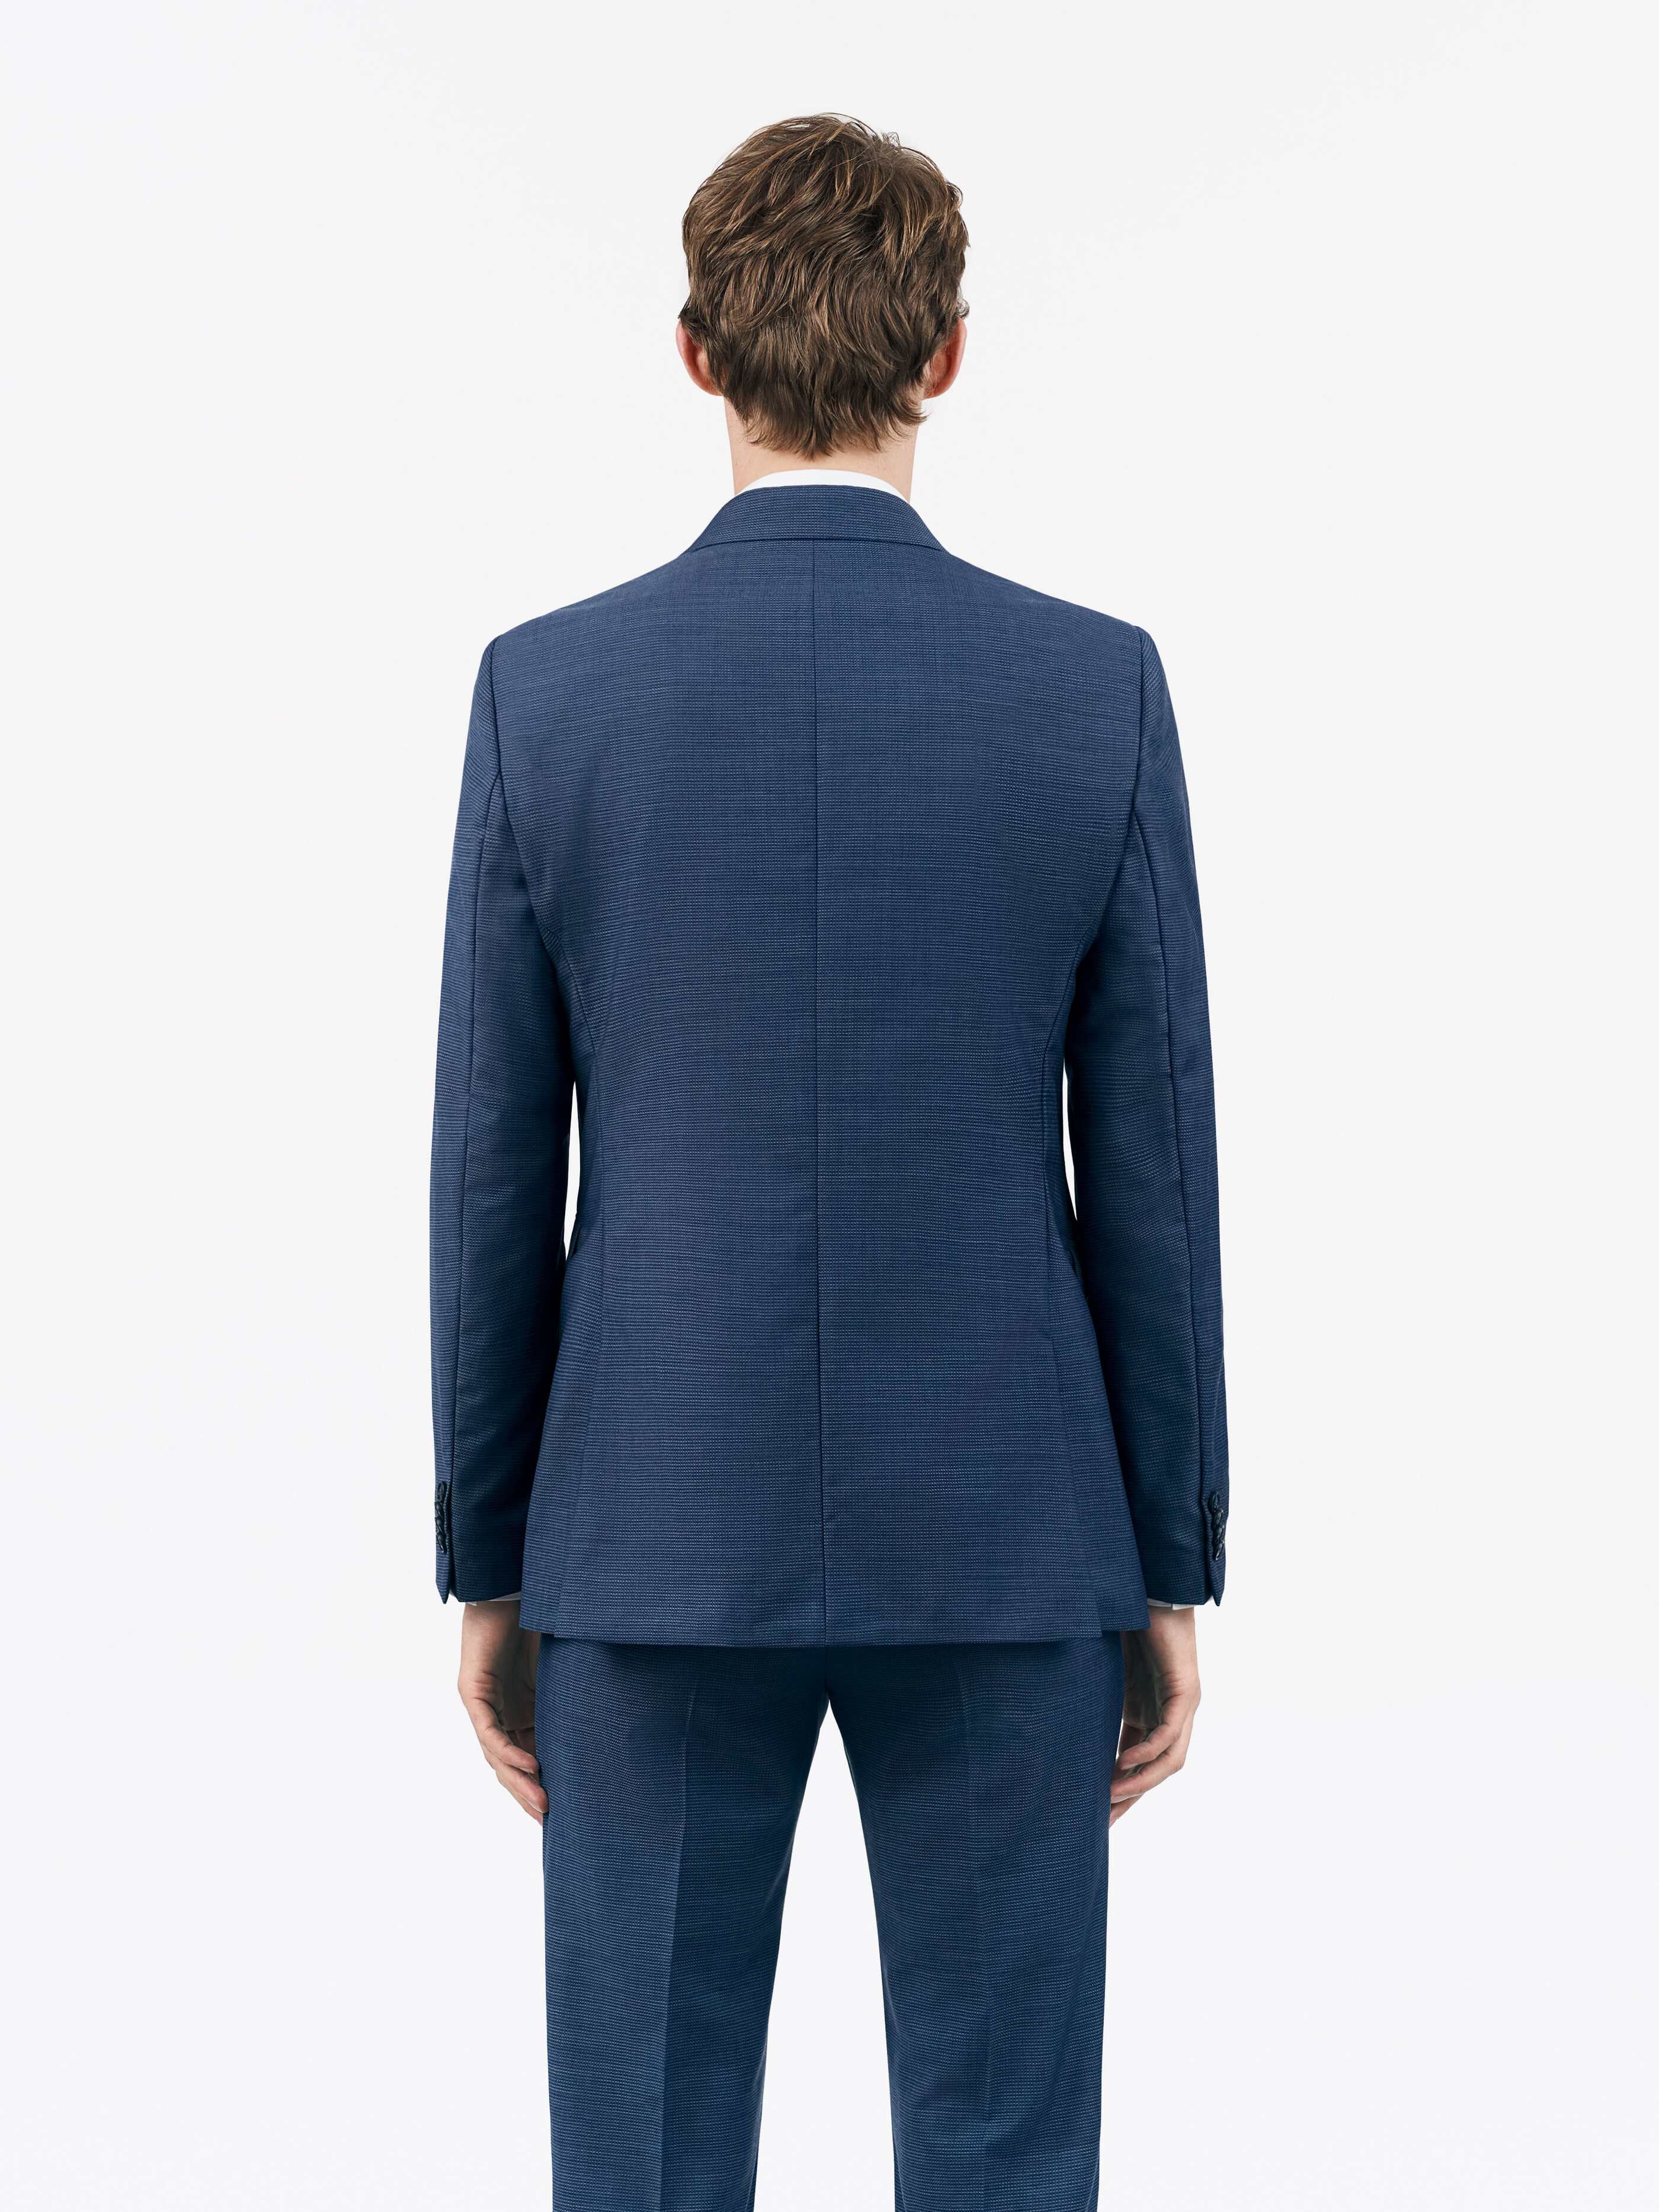 TIGER OF SWEDEN Justin Blazer in Blue T71616035 | Shop from eightywingold an official brand partner for Tiger of Sweden Canada and US.